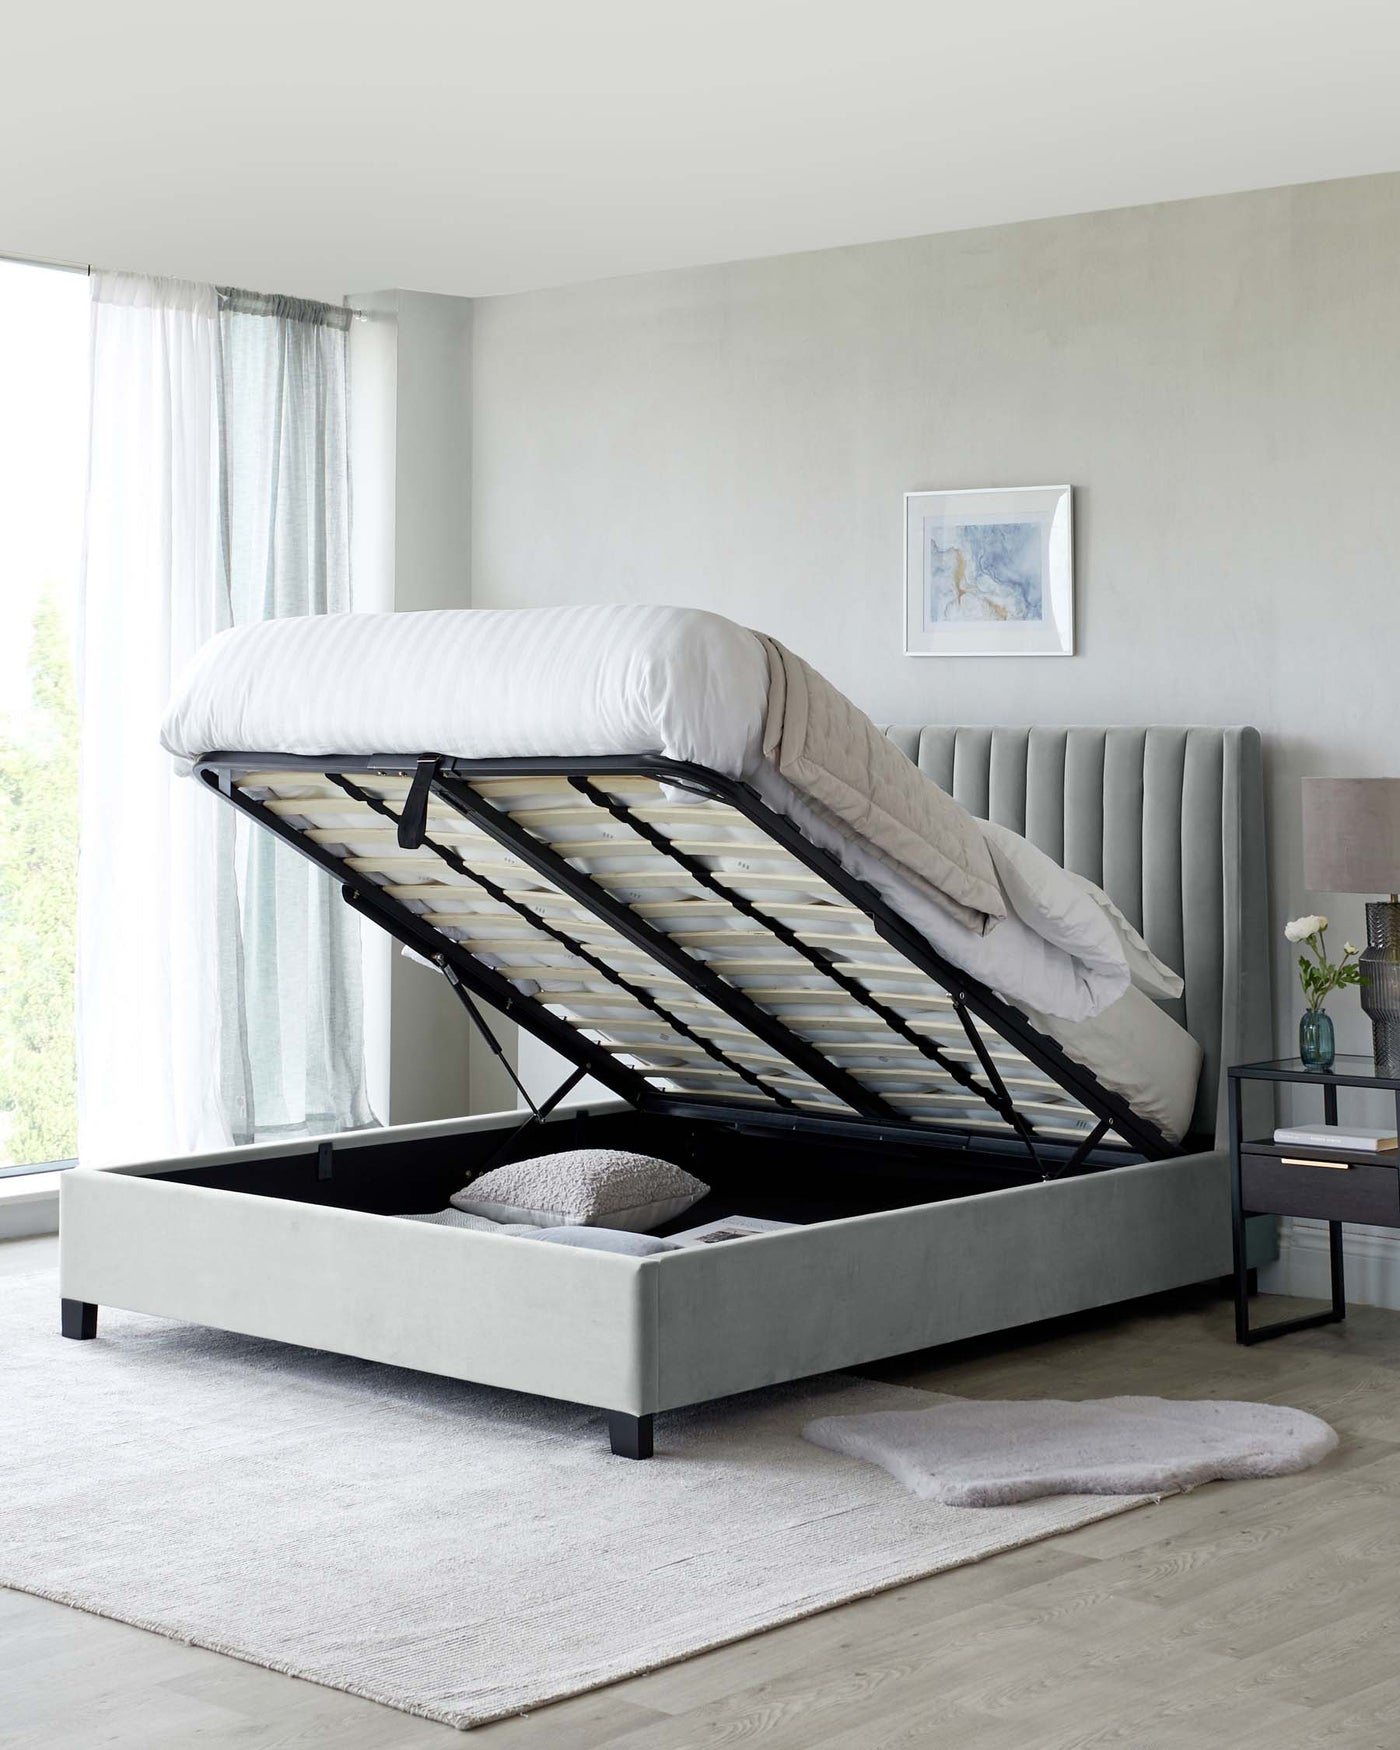 Gray upholstered storage bed with tufted headboard, featuring a lifted mattress base revealing ample under-bed storage. Black metal lifting mechanism with wooden slats, flanked by a small, dark-toned nightstand with a drawer and a lower shelf displaying a book and a white vase.